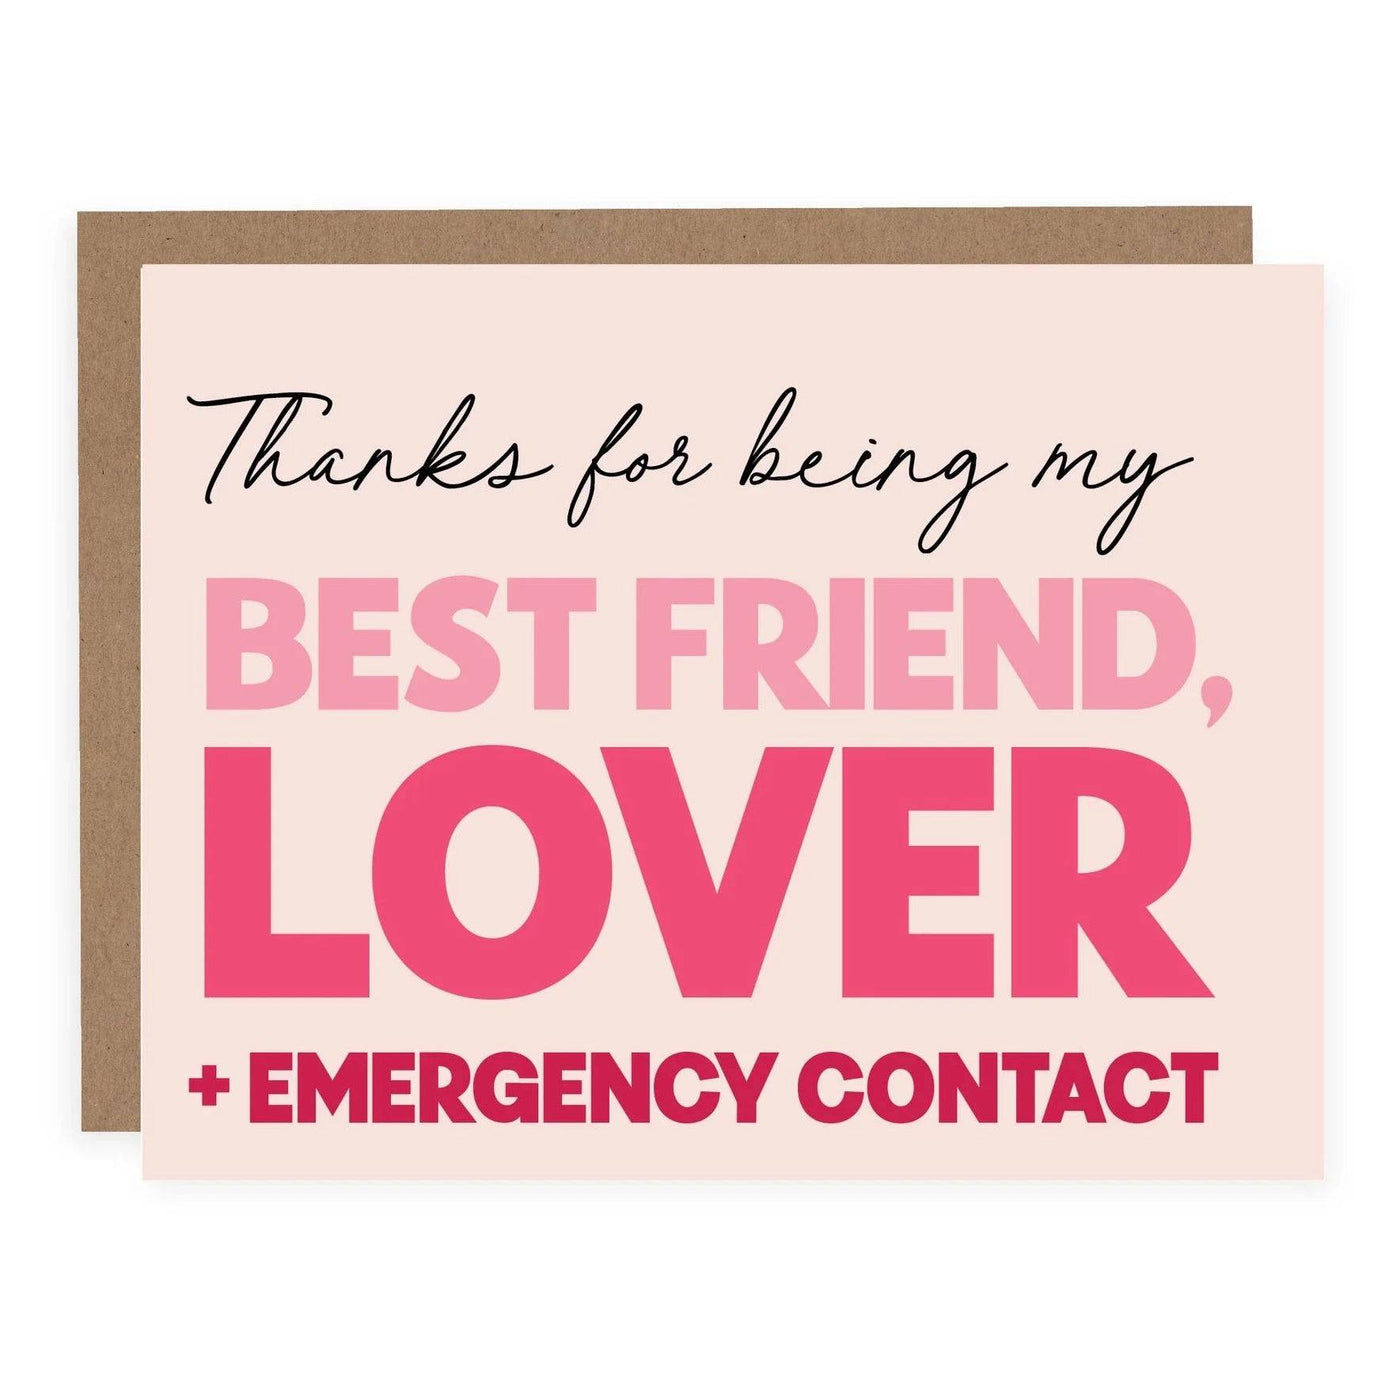 Best Friend, Lover + Emergency Contact | Greeting Card - The Local Space